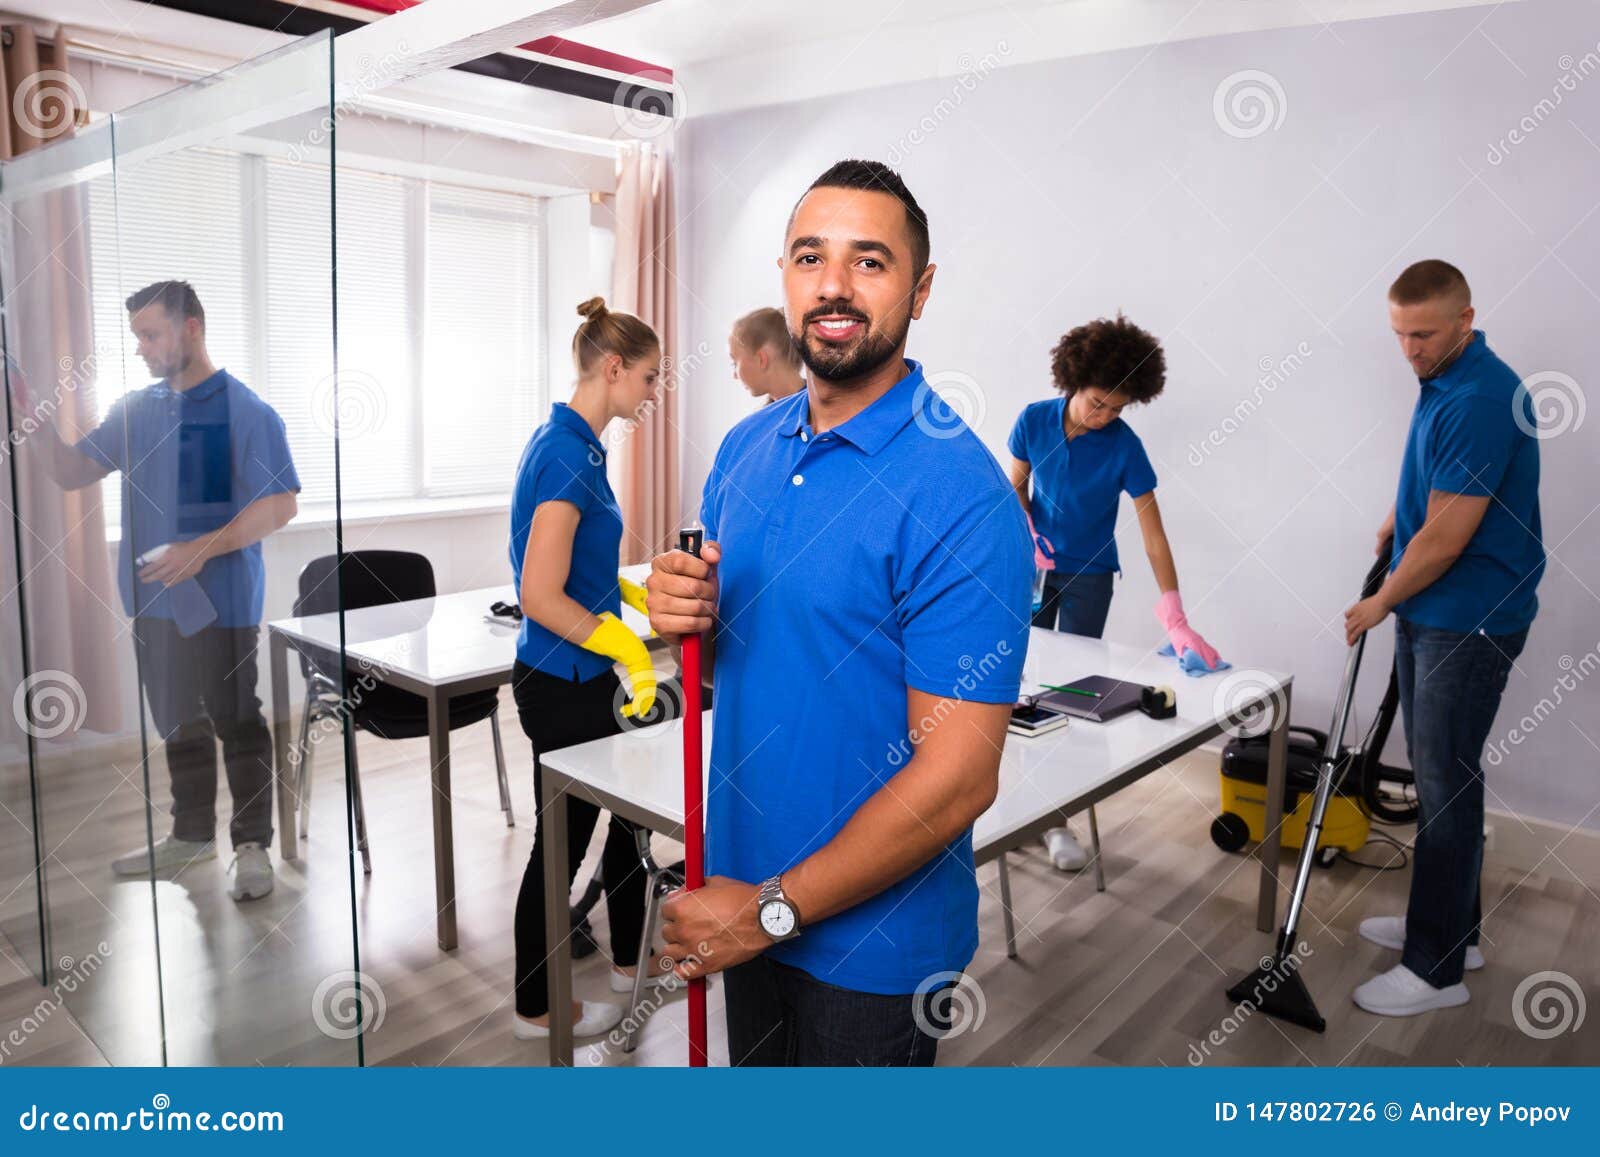 portrait of a male janitor